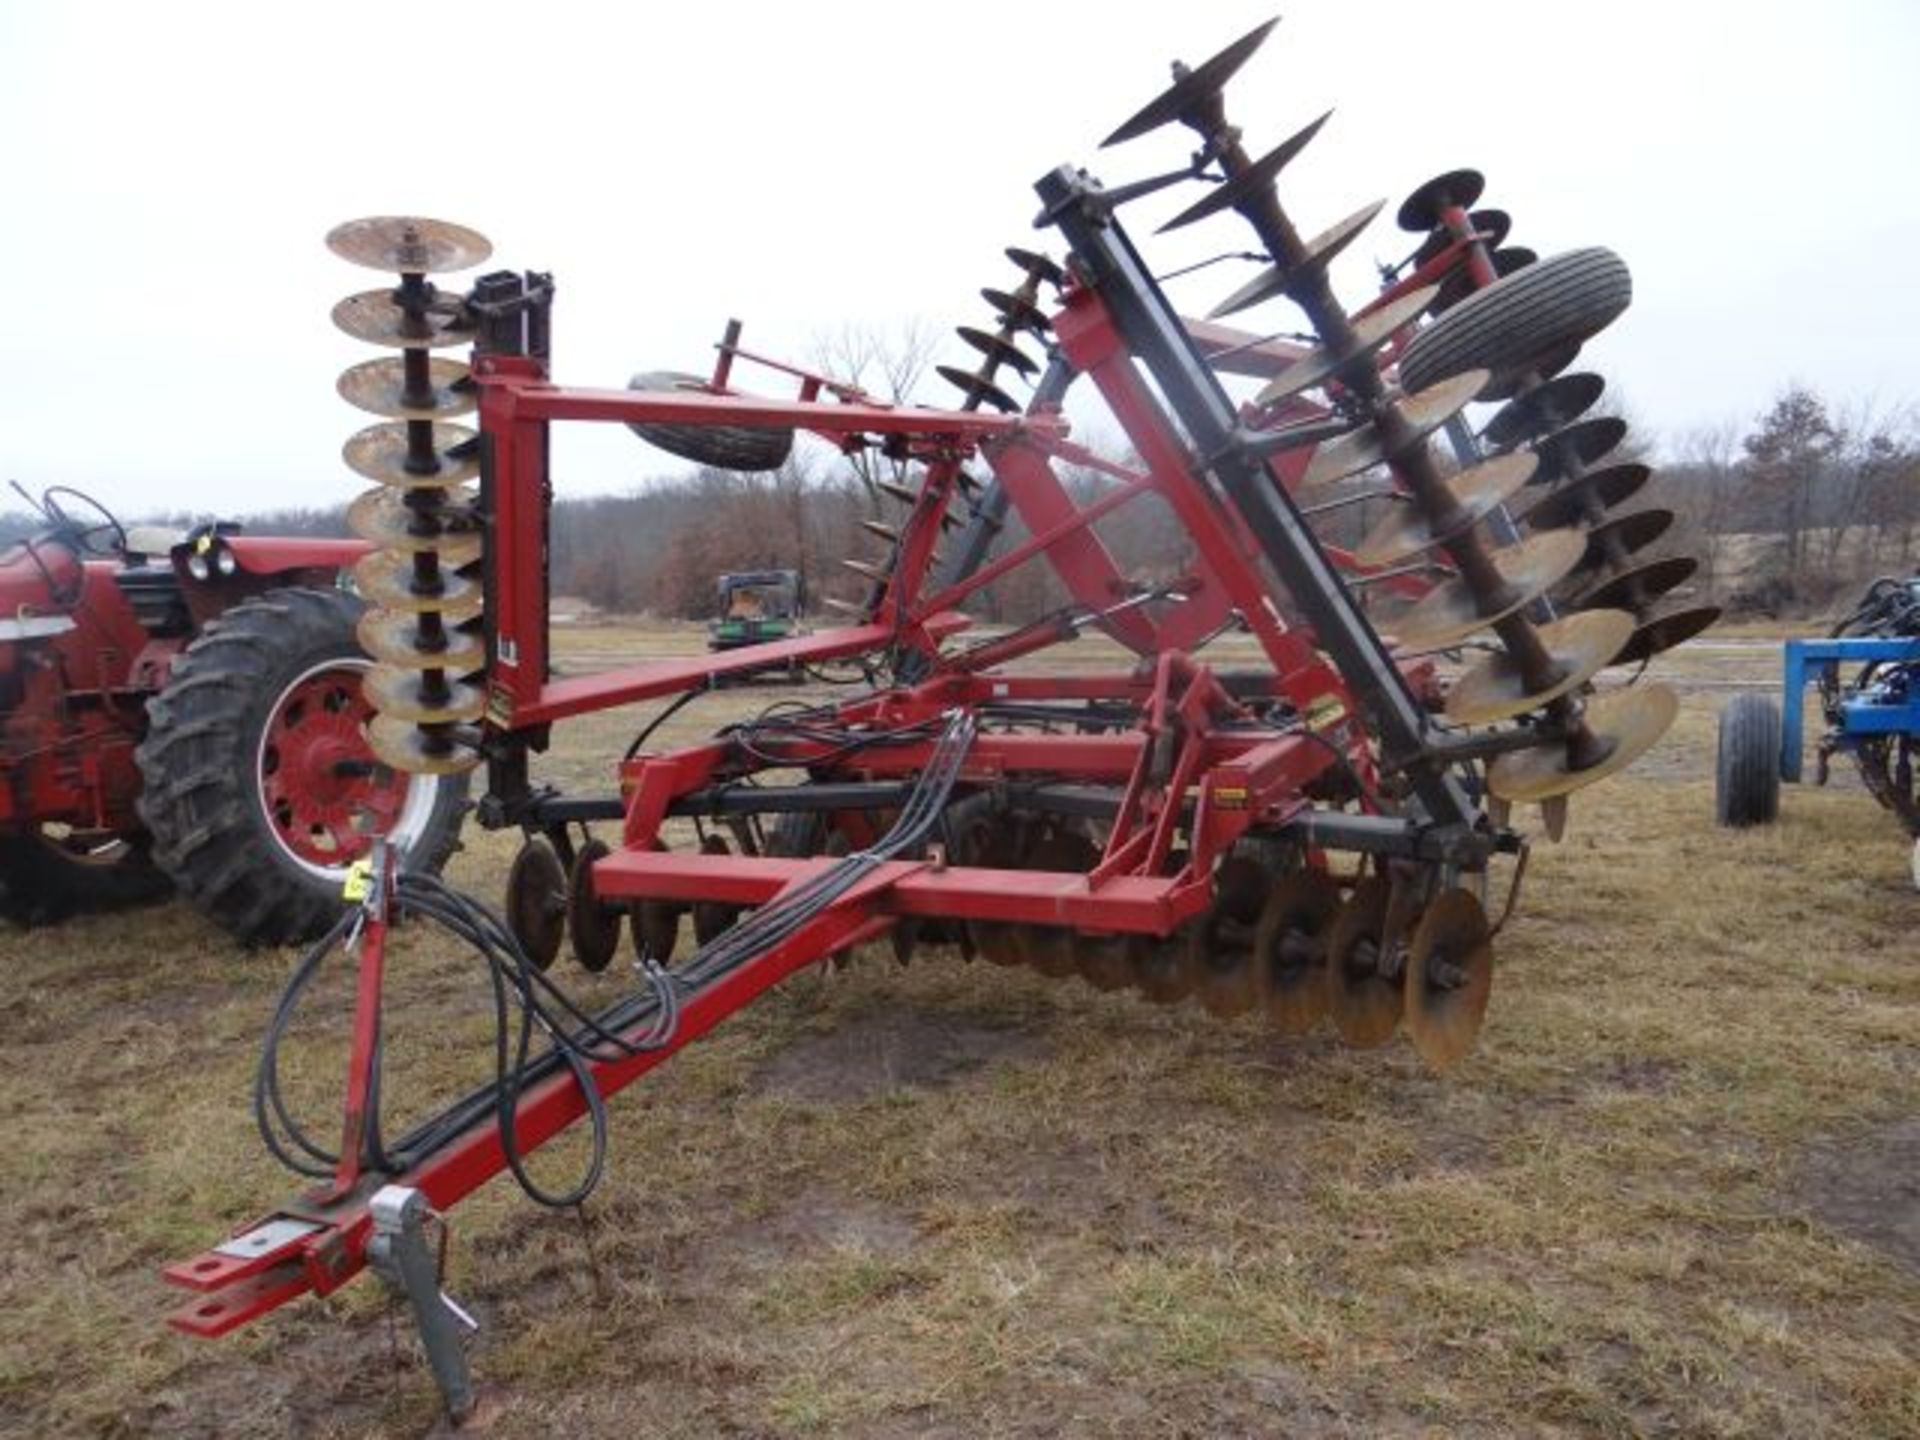 IH 496 Disk 26', 7 1/4" Spacing, Manual in the Shed